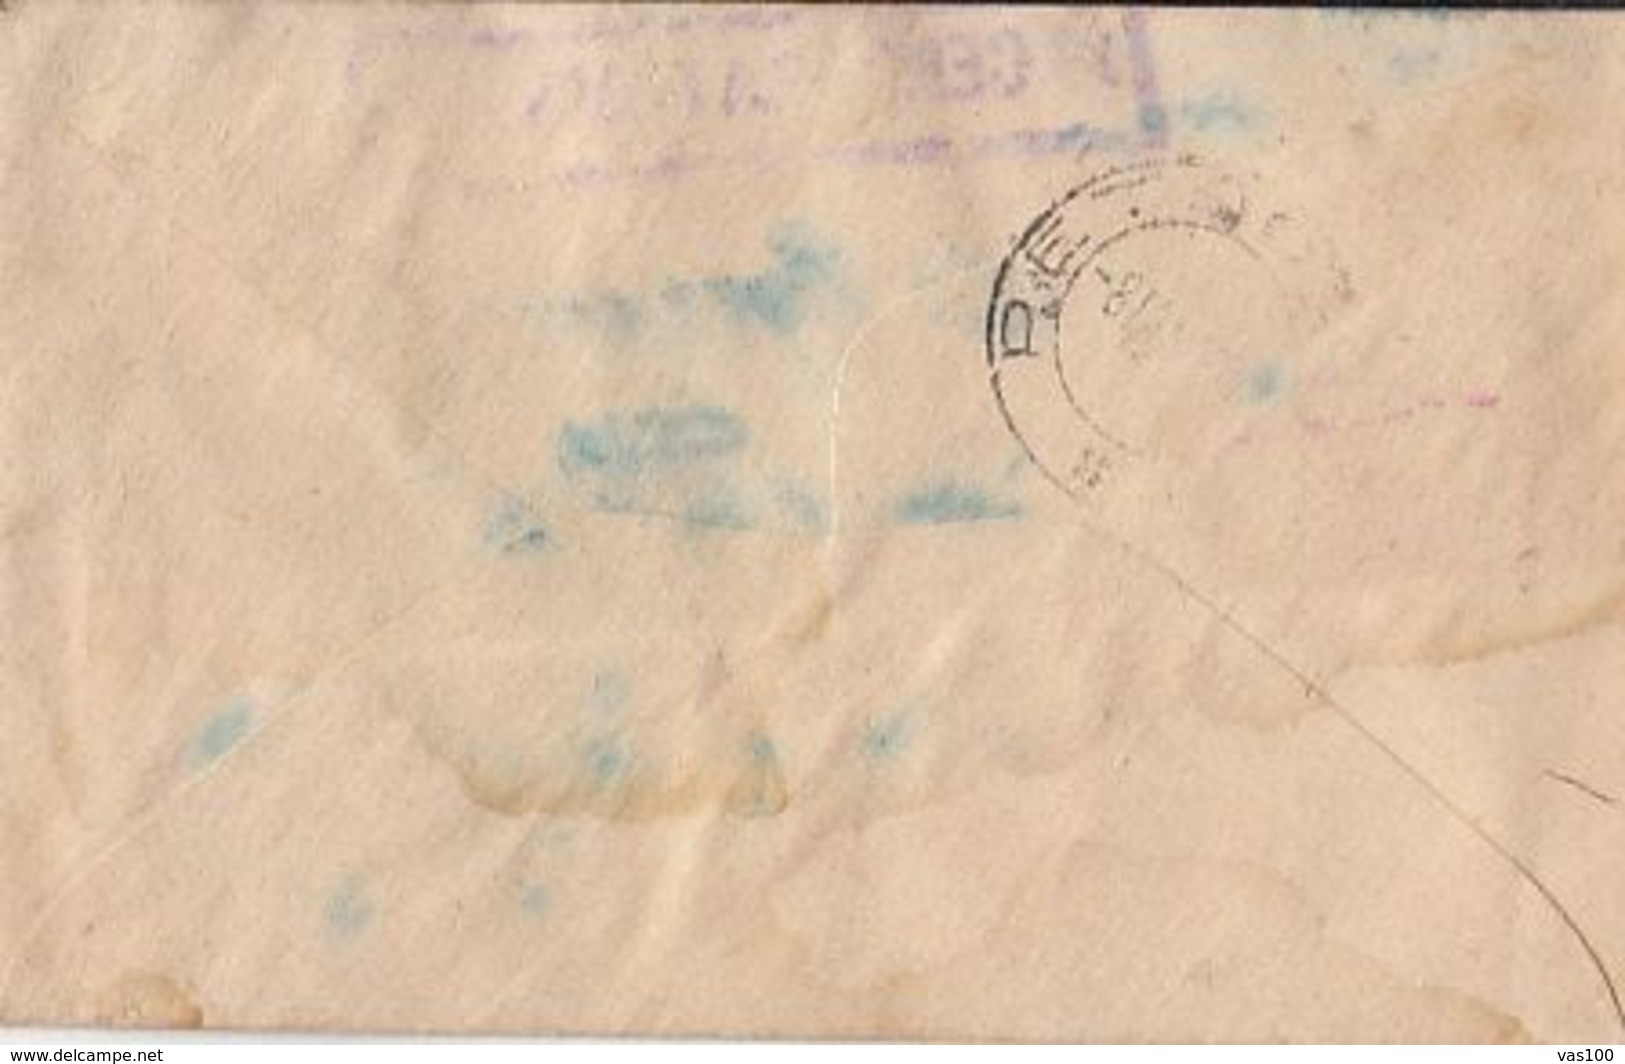 WW2 LETTER, CENSORED, KING MICHAEL STAMP ON LILIPUT COVER, 1946, ROMANIA - World War 2 Letters